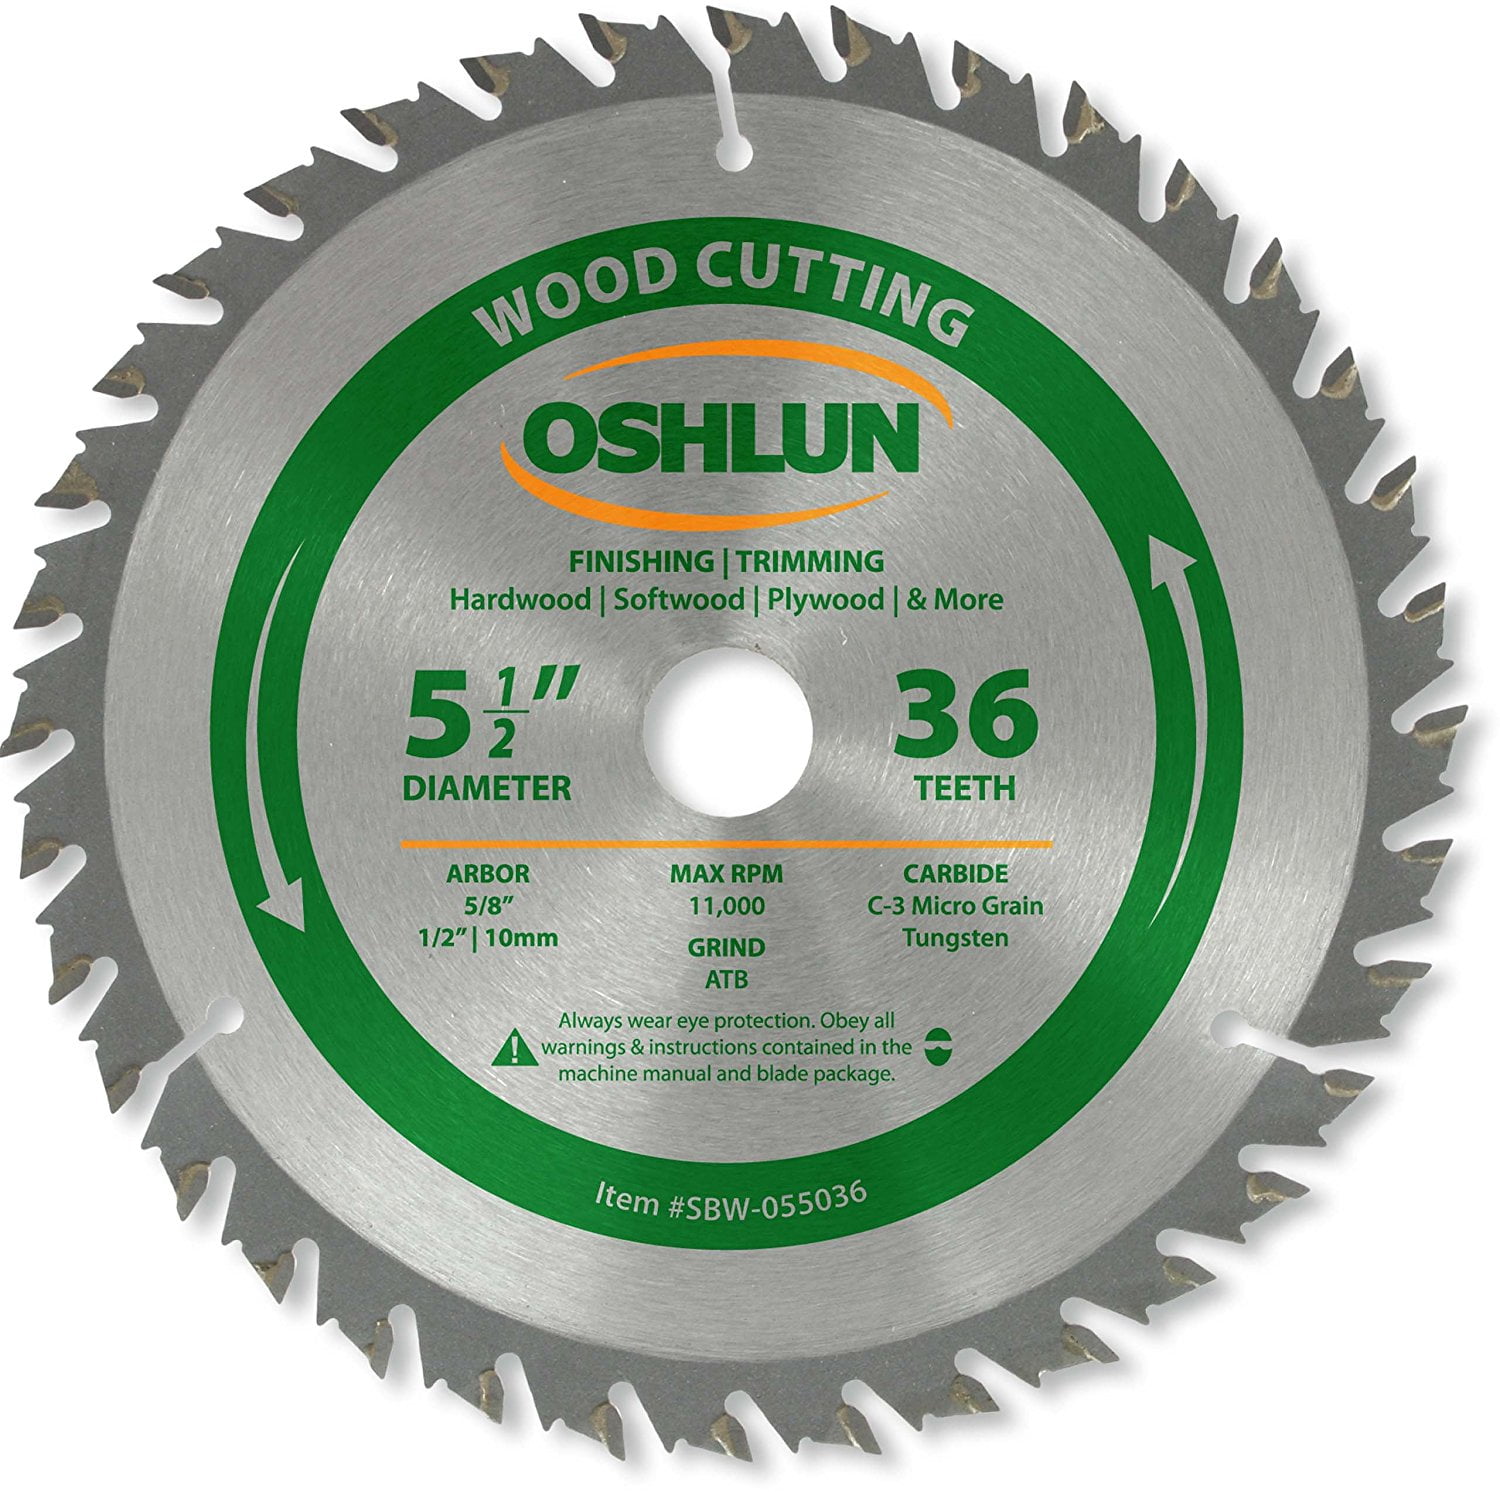 Oshlun SBW-034024 3-3/8-Inch 24 Tooth ATB General Purpose and Trimming Saw Blade 